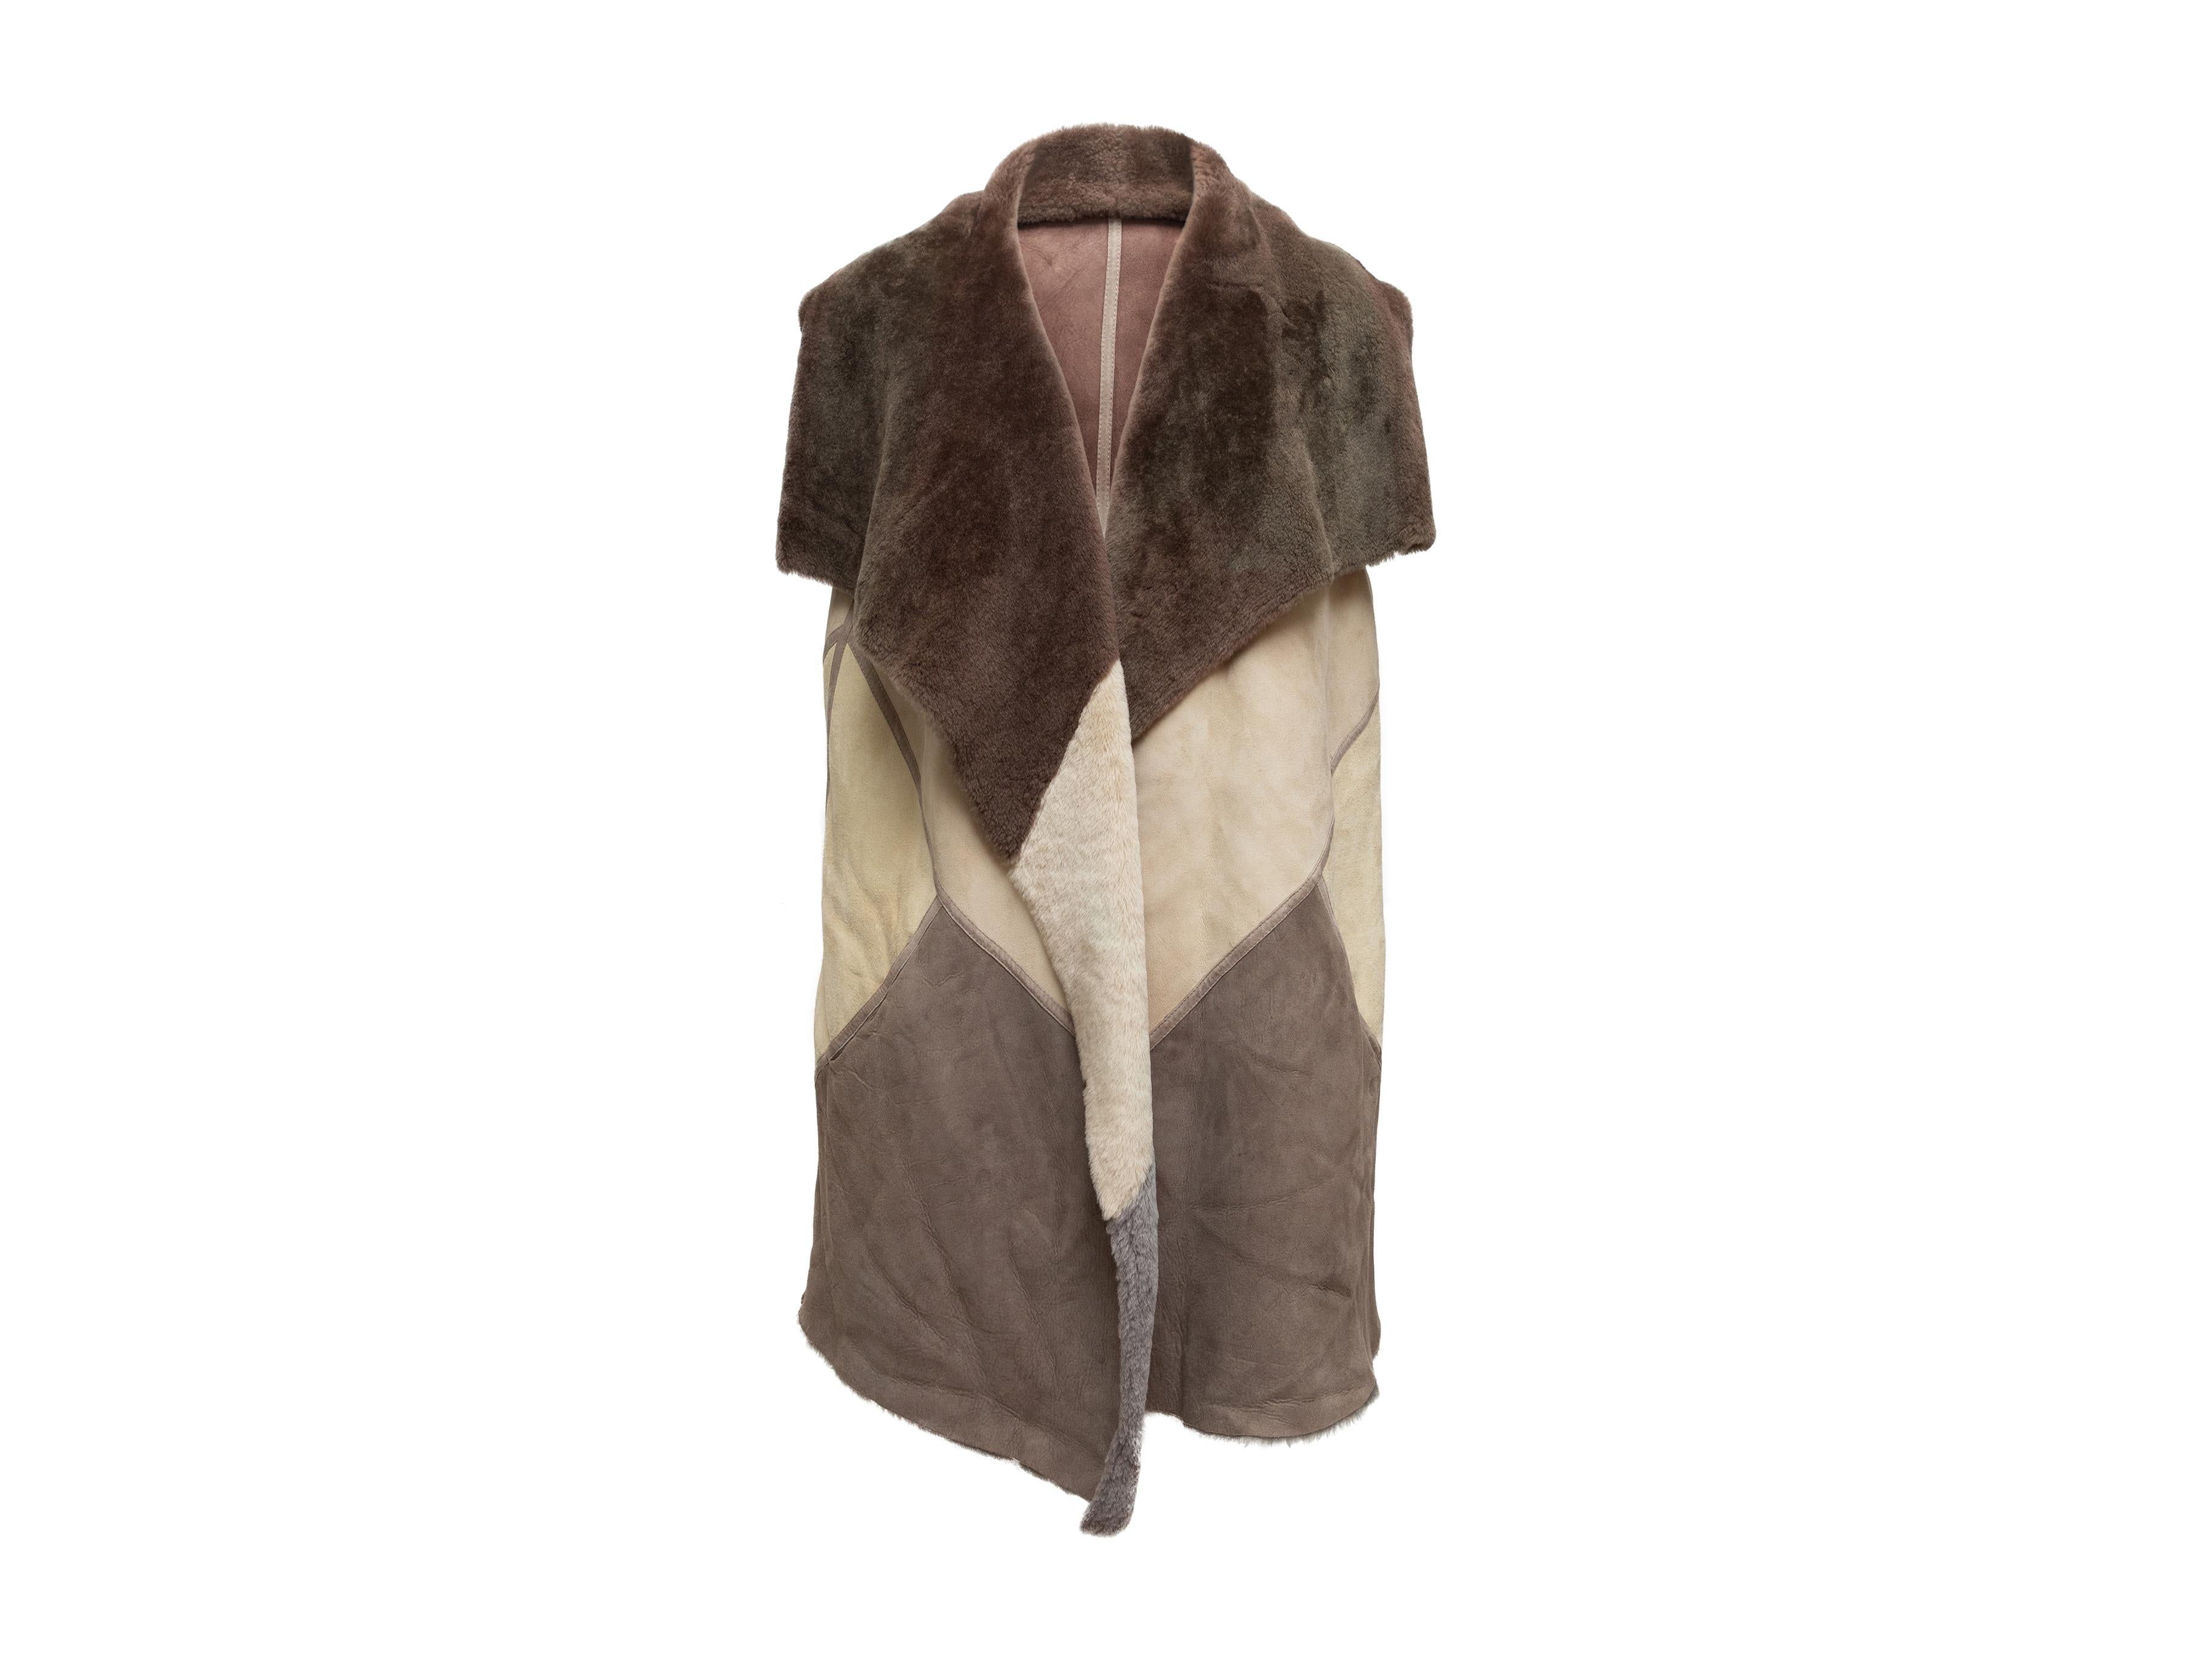 Product details: Brown and beige long shearling color block vest by Lafayette 148. Pointed collar. Open front. 48